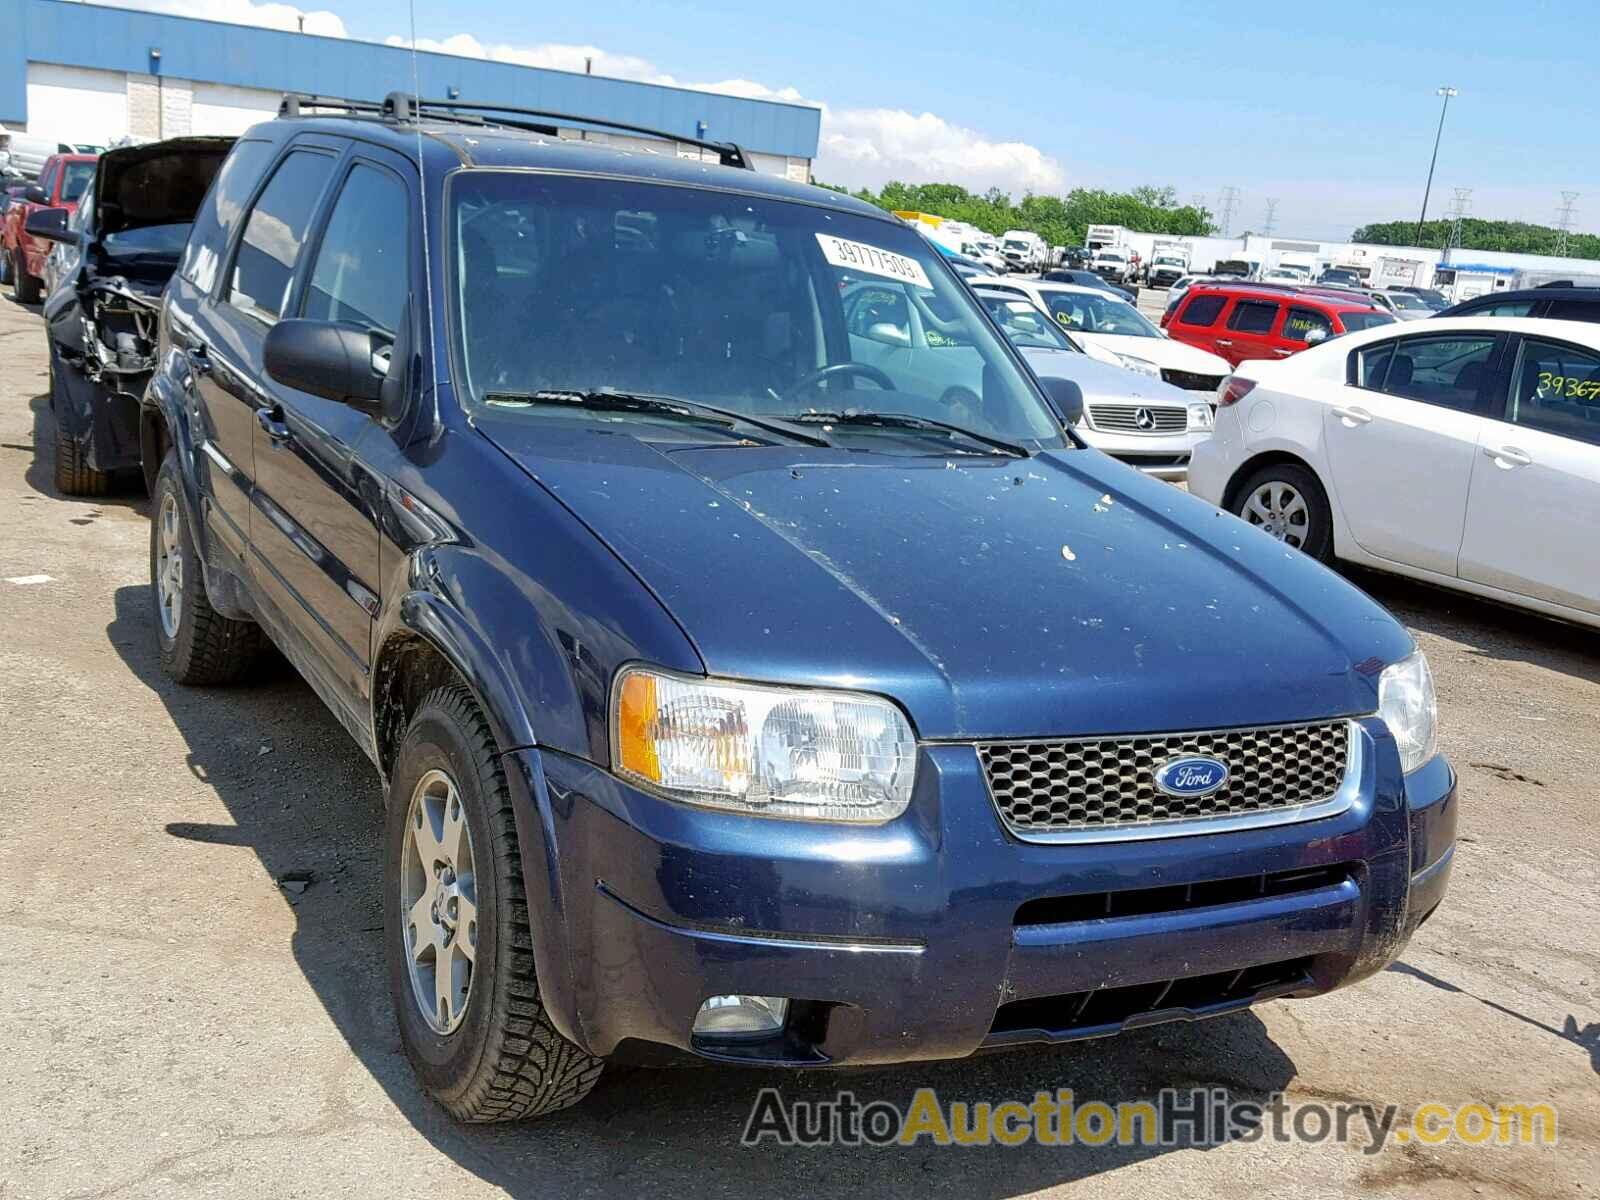 2003 FORD ESCAPE LIMITED, 1FMCU94113KB43133